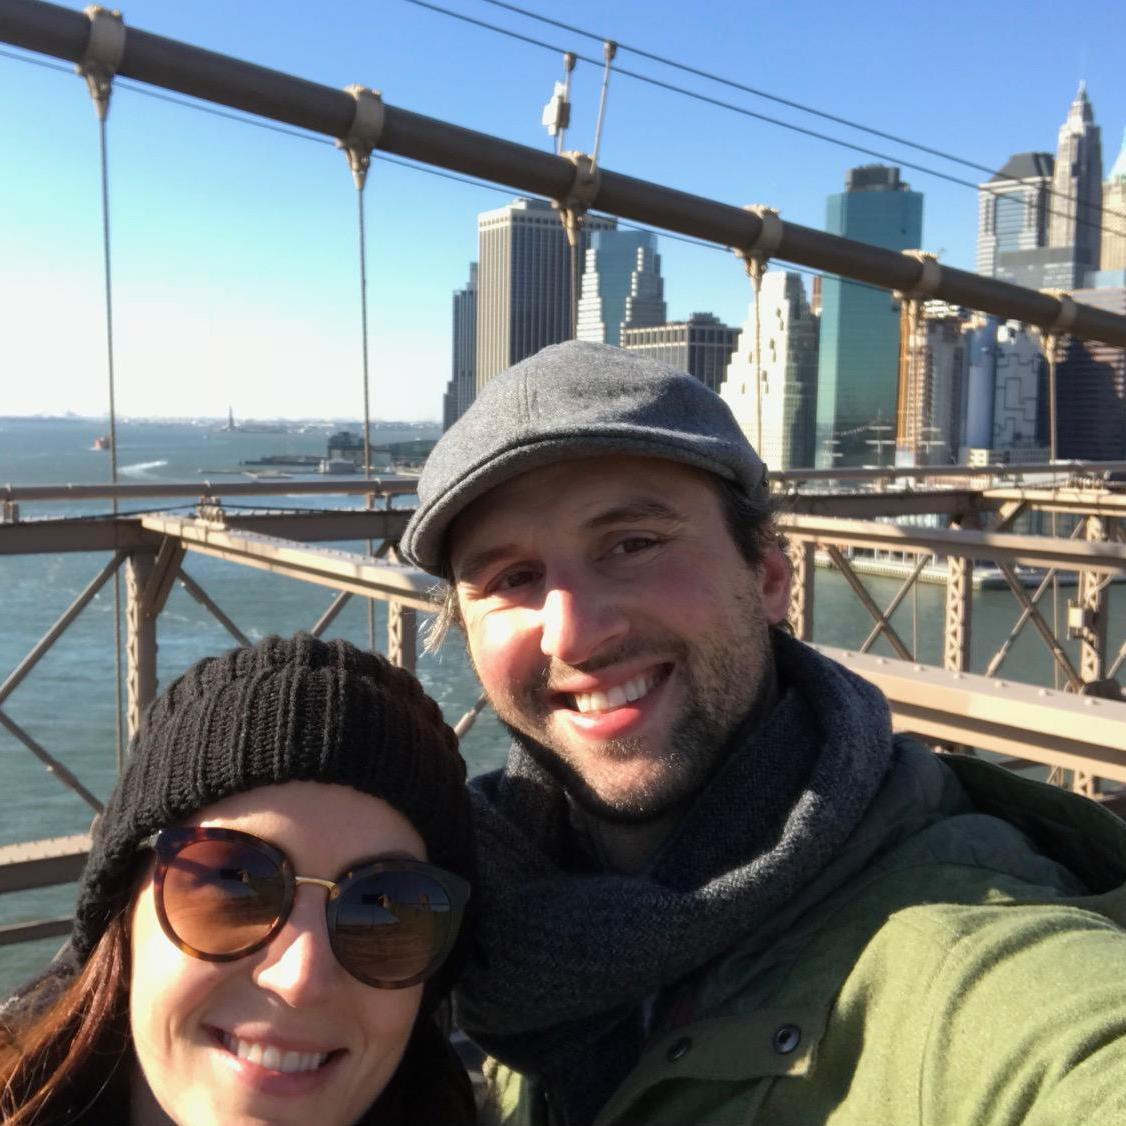 Walking over the Brooklyn Bridge - otherwise known as the trip that B&K fell in love (December 2017)